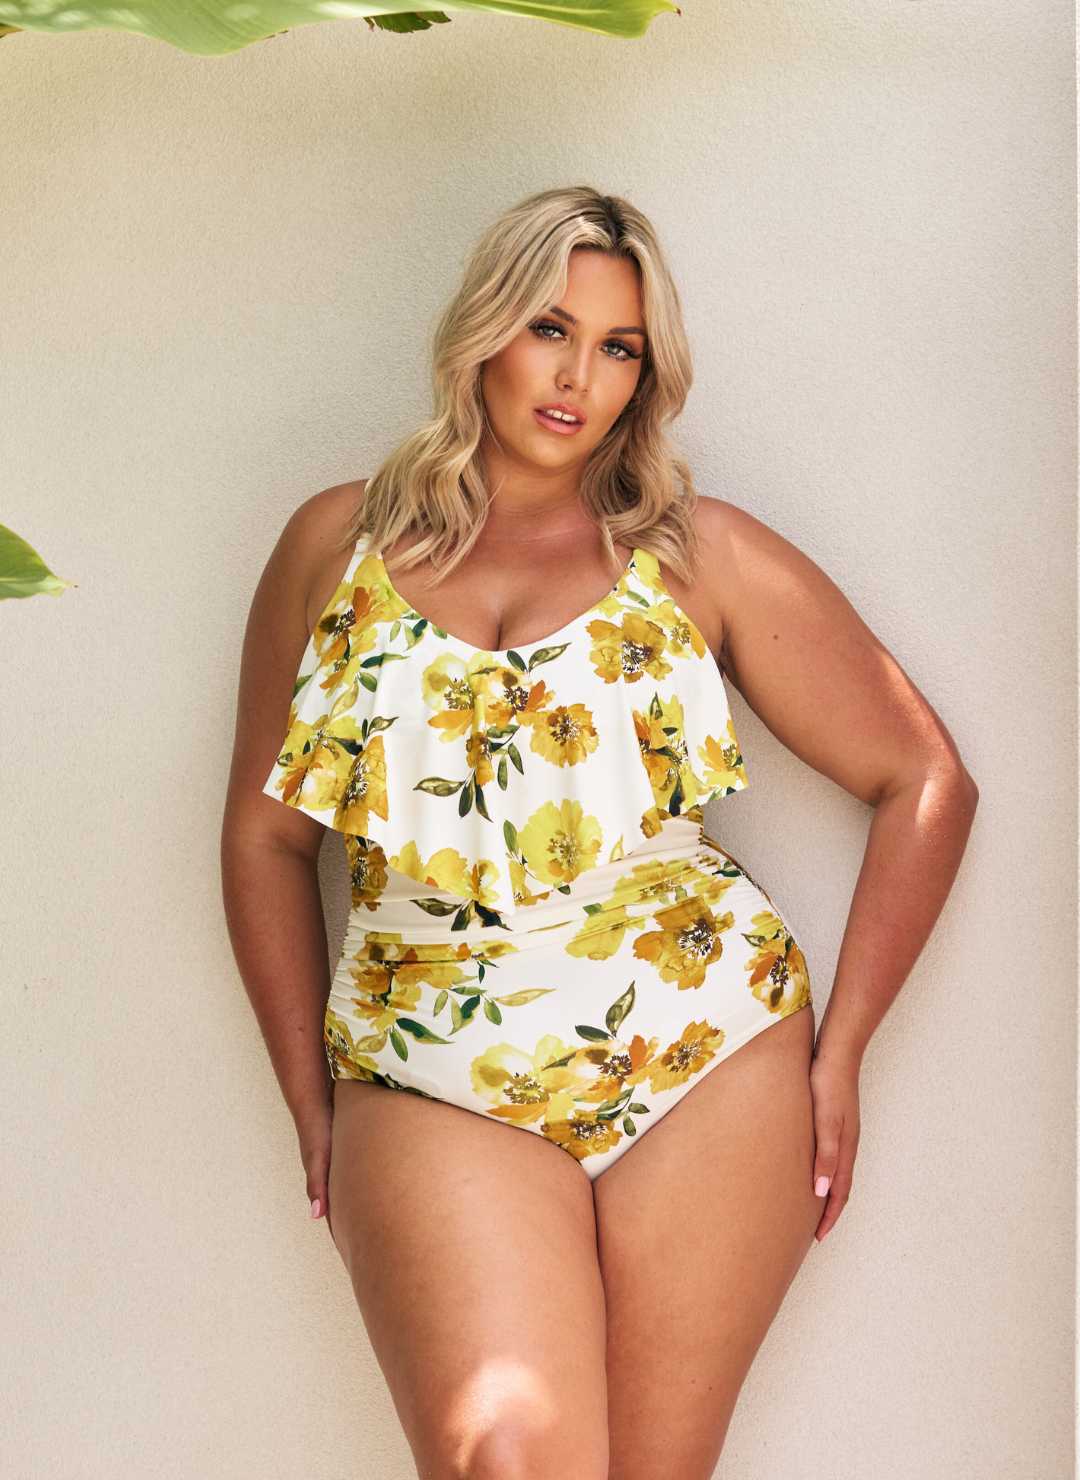 Wear this swimdress with more bust and hip coverage, if you're in